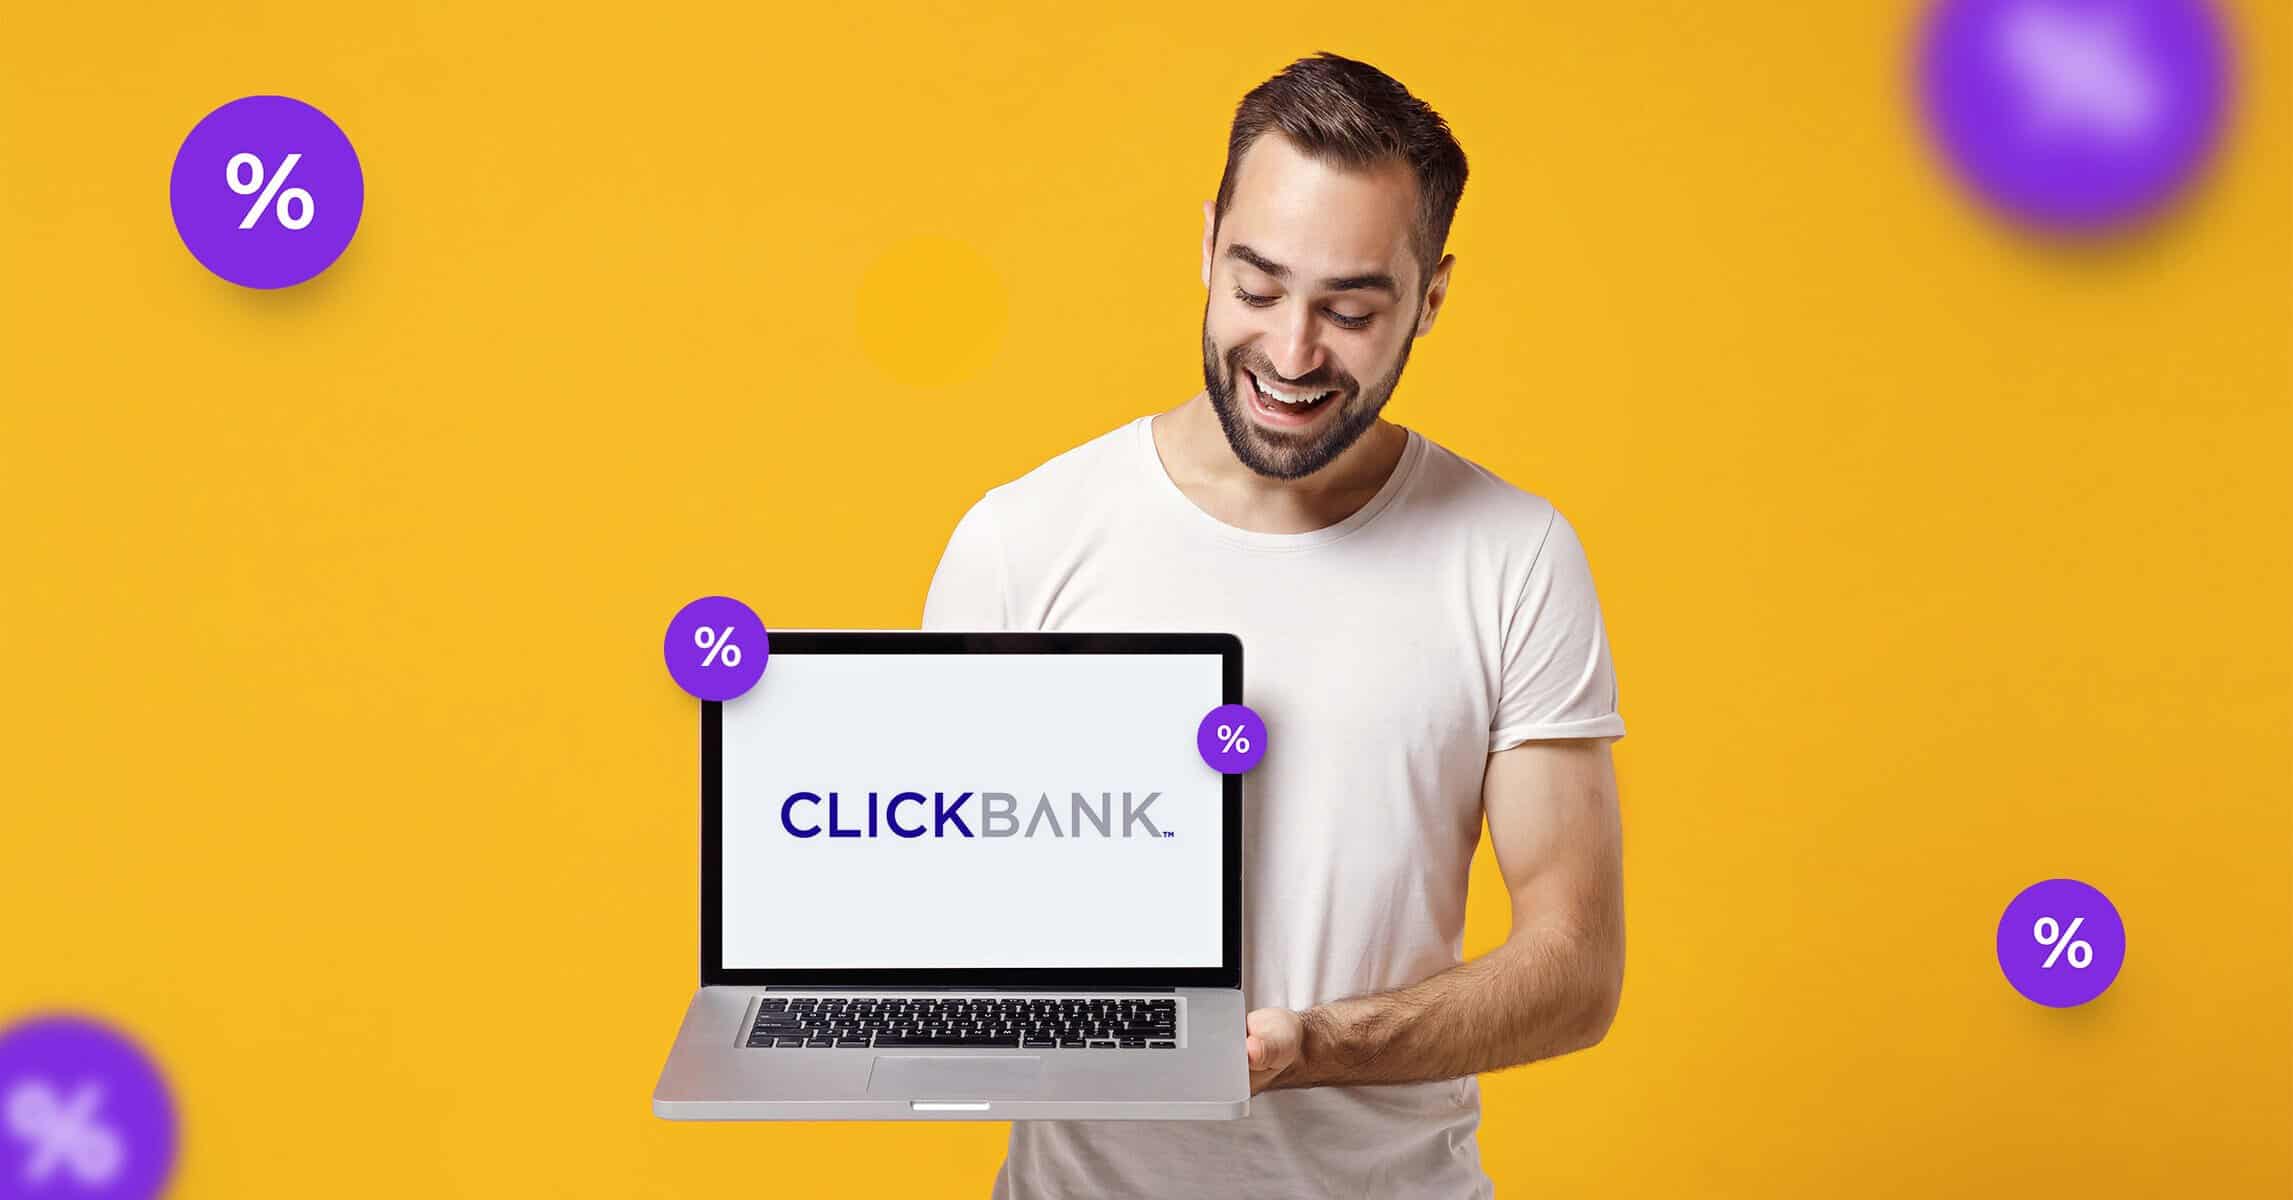 How to Promote a Clickbank Product and Increase Your Sales